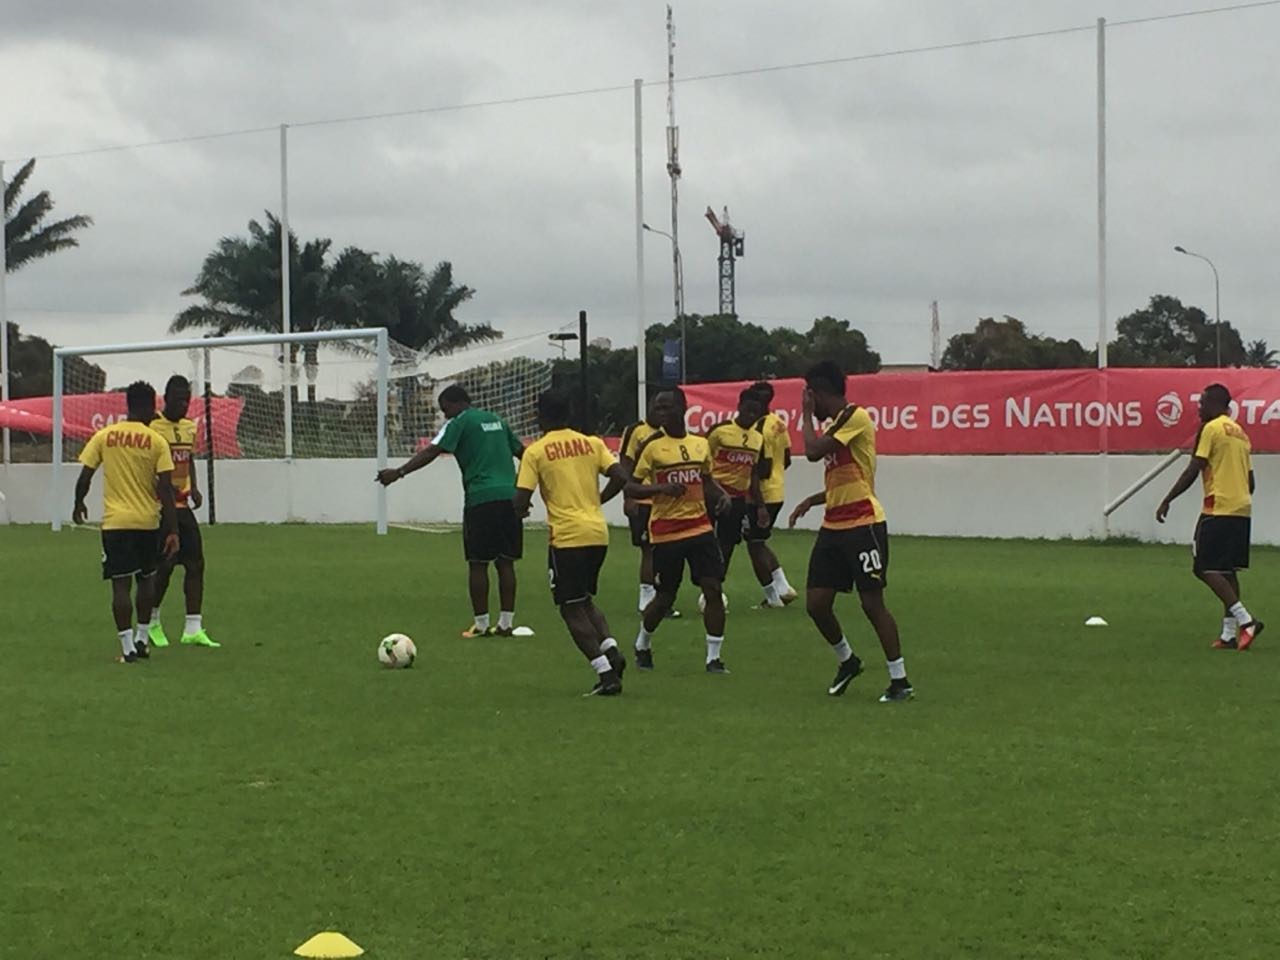 AFCON 2017: Ghana begin preparations to face Mali